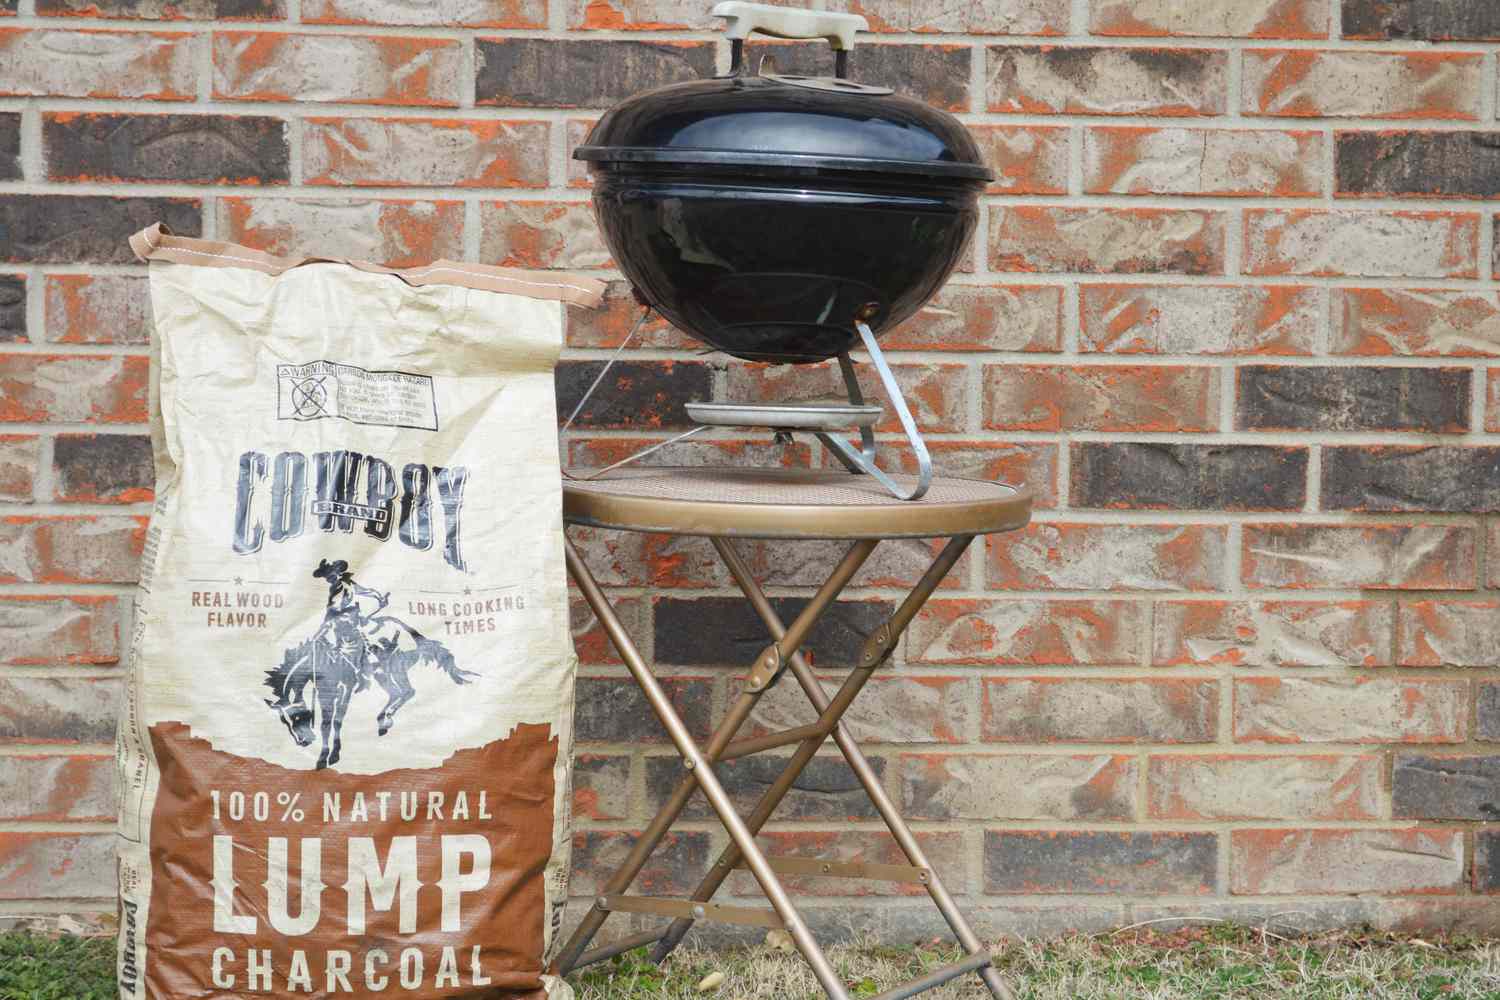 a bag of lump charcoal beside a portable charcoal grill